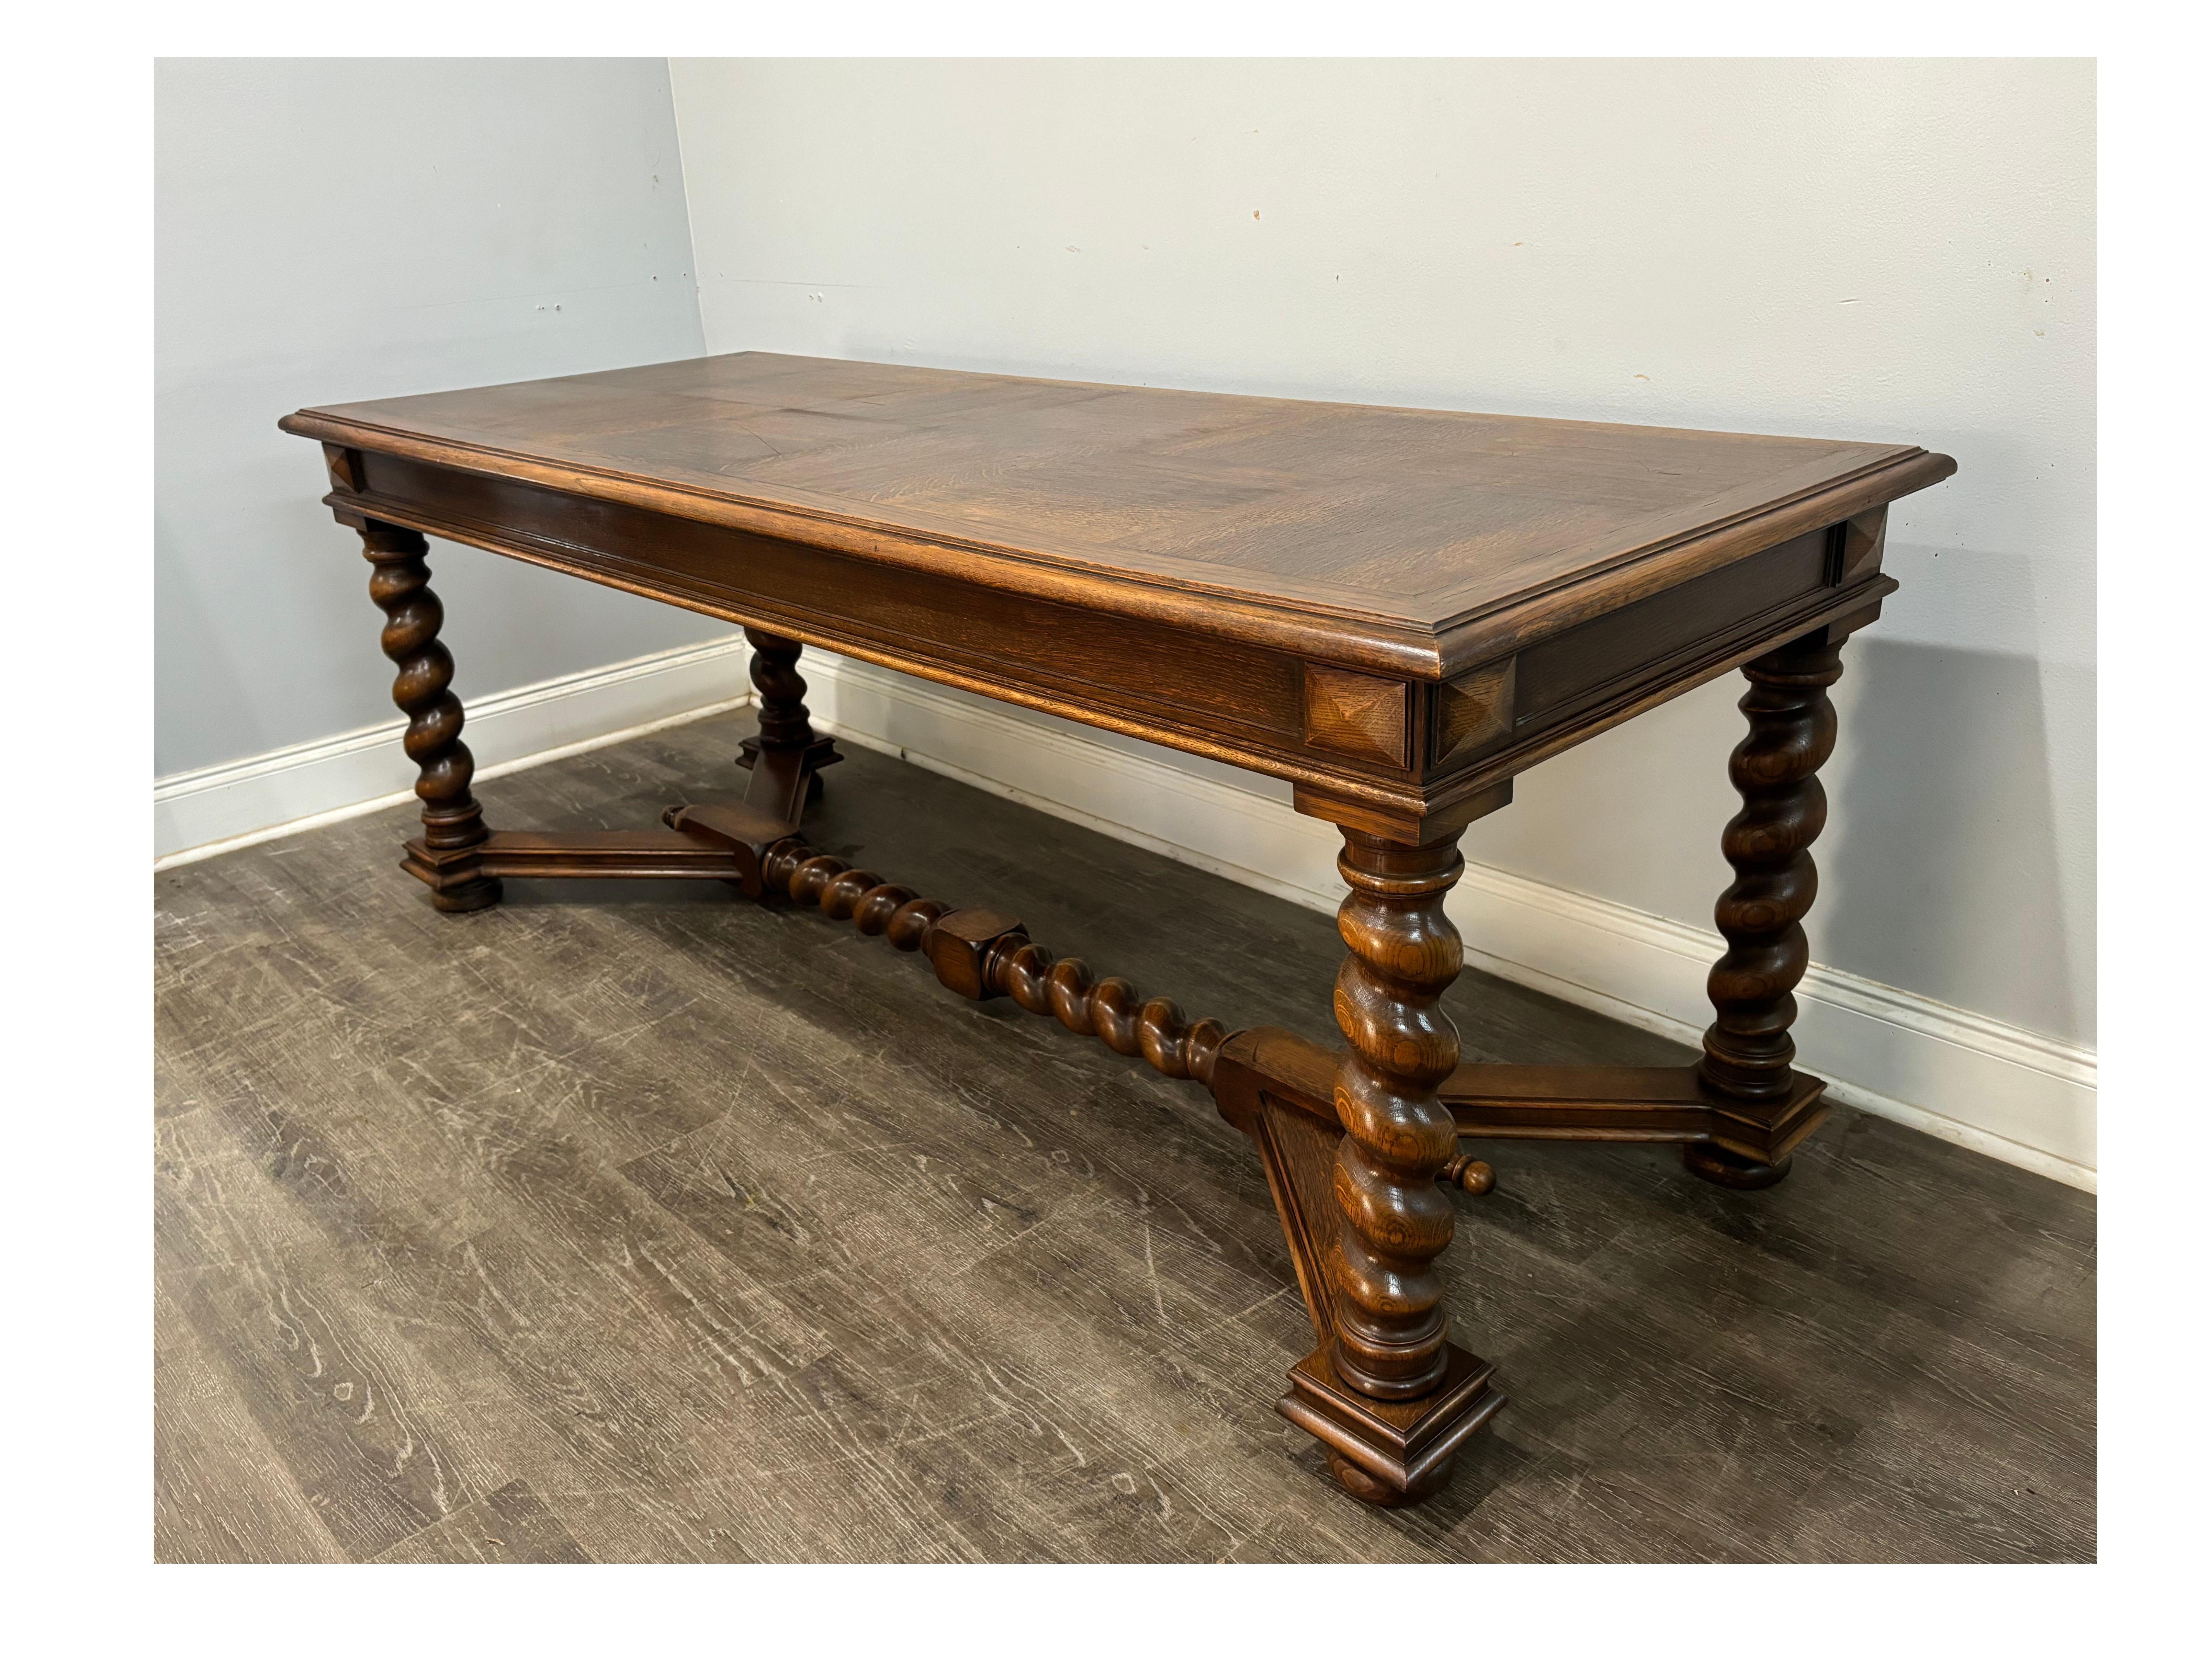 Wonderful Table in the Louis XIII style with twisted feet and a parqueted top.